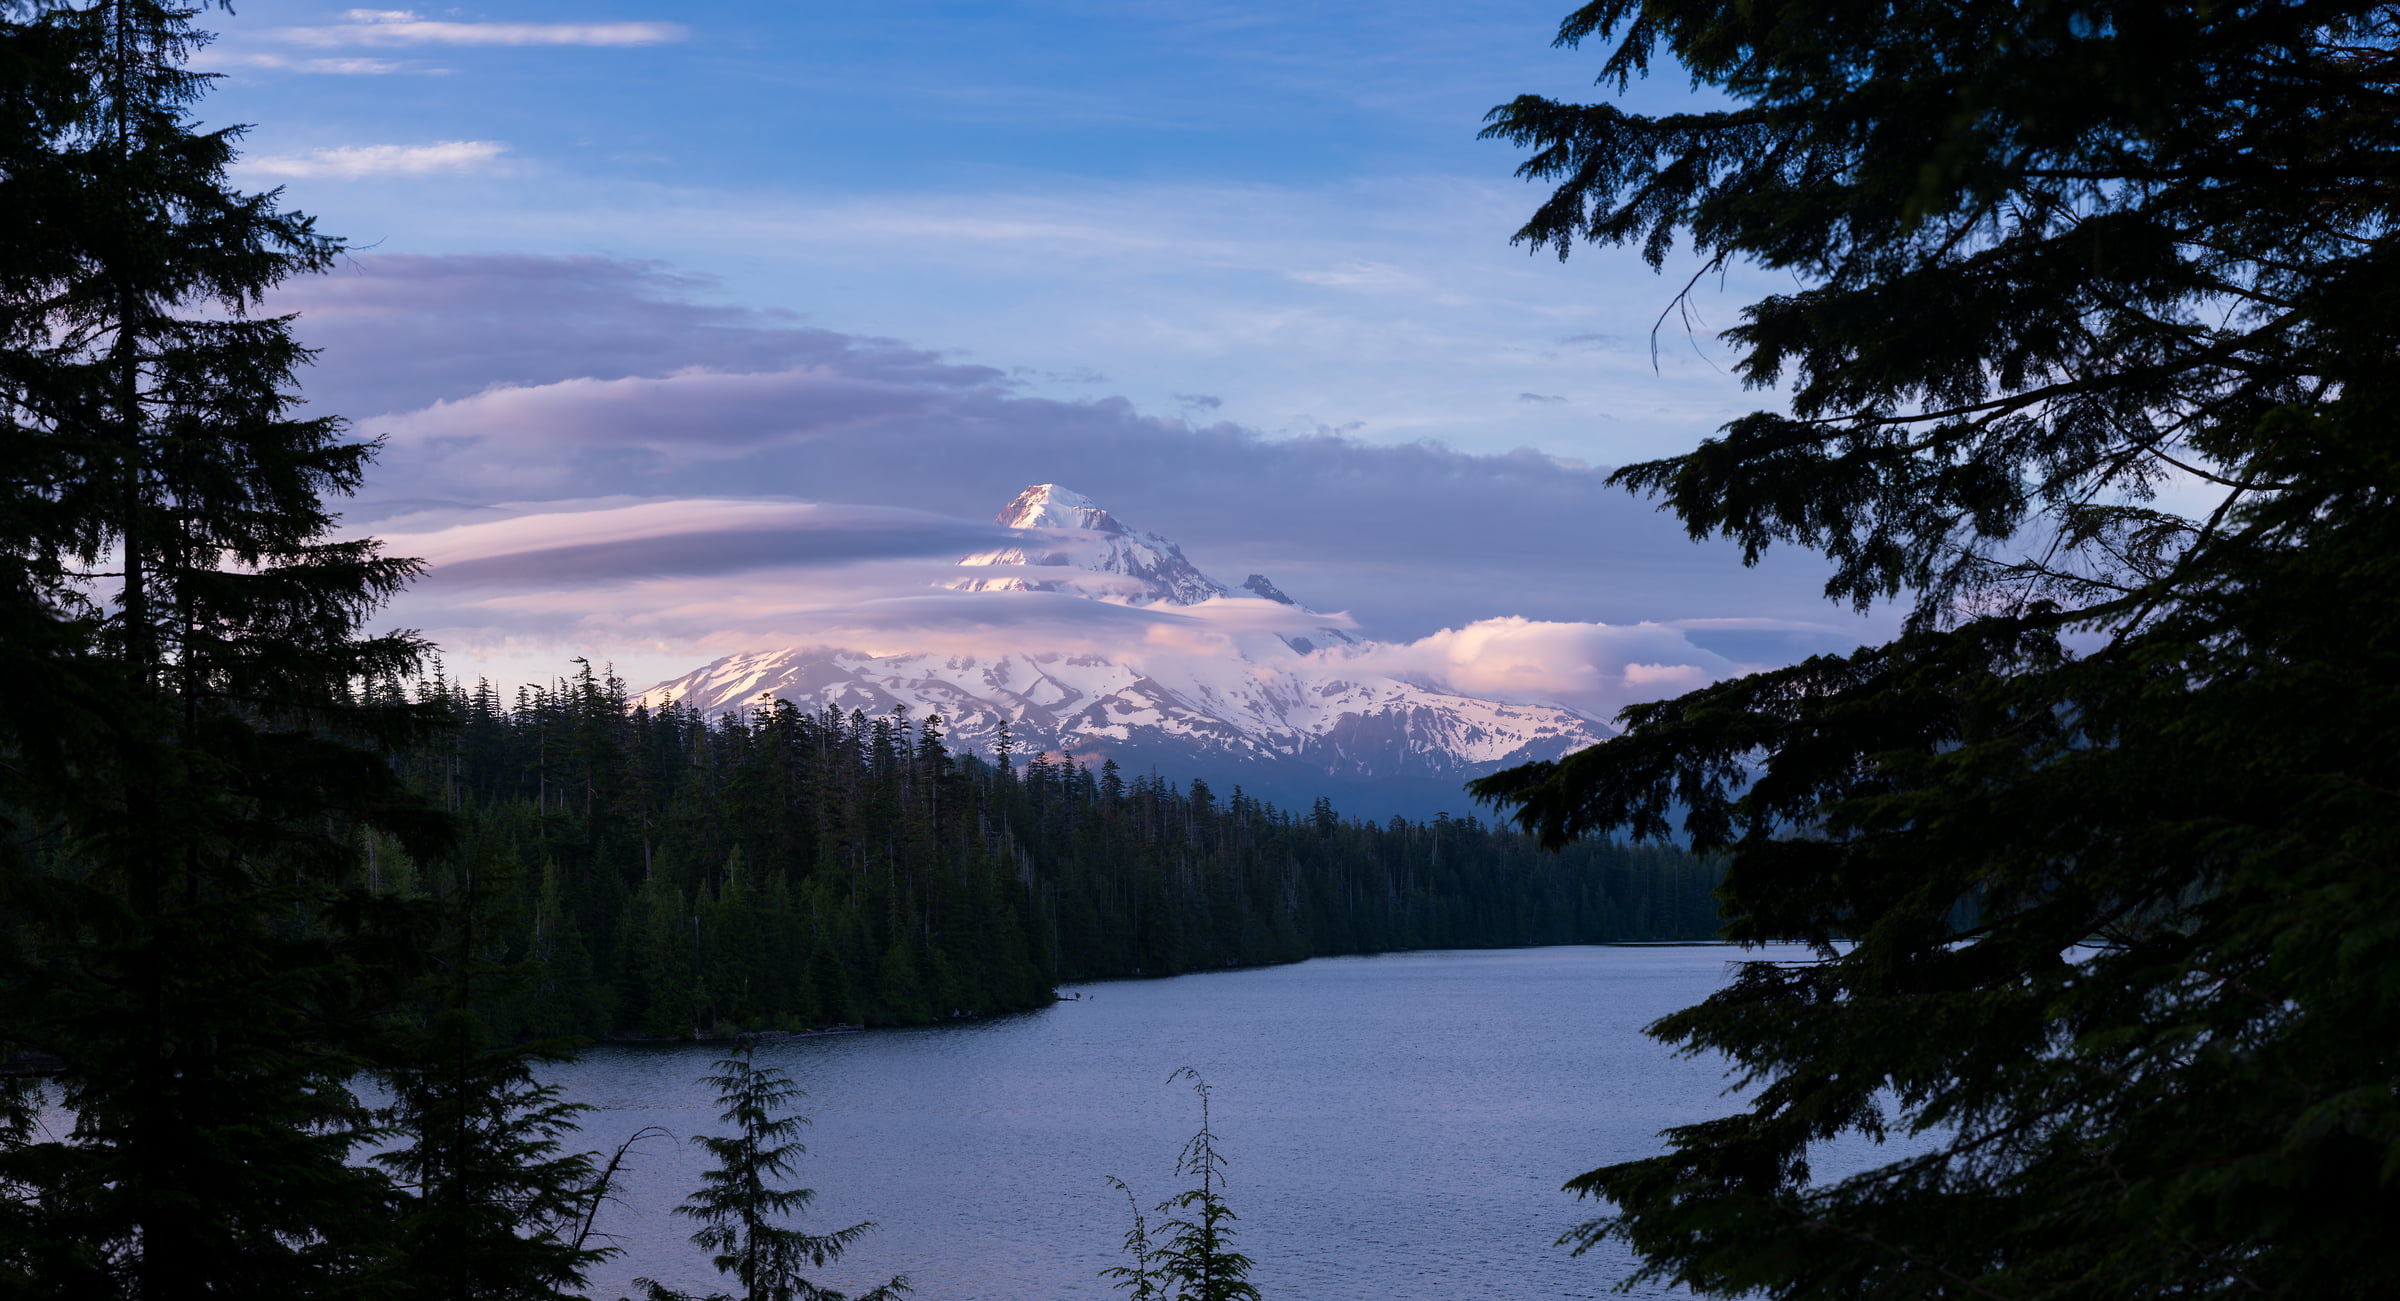 321 megapixels! A very high resolution, large-format VAST photo print of a mountain at sunset with purple clouds, a forest, and a lake; landscape photograph created by Greg Probst in Lost Lake, Mt. Hood National Forest, Oregon, USA.